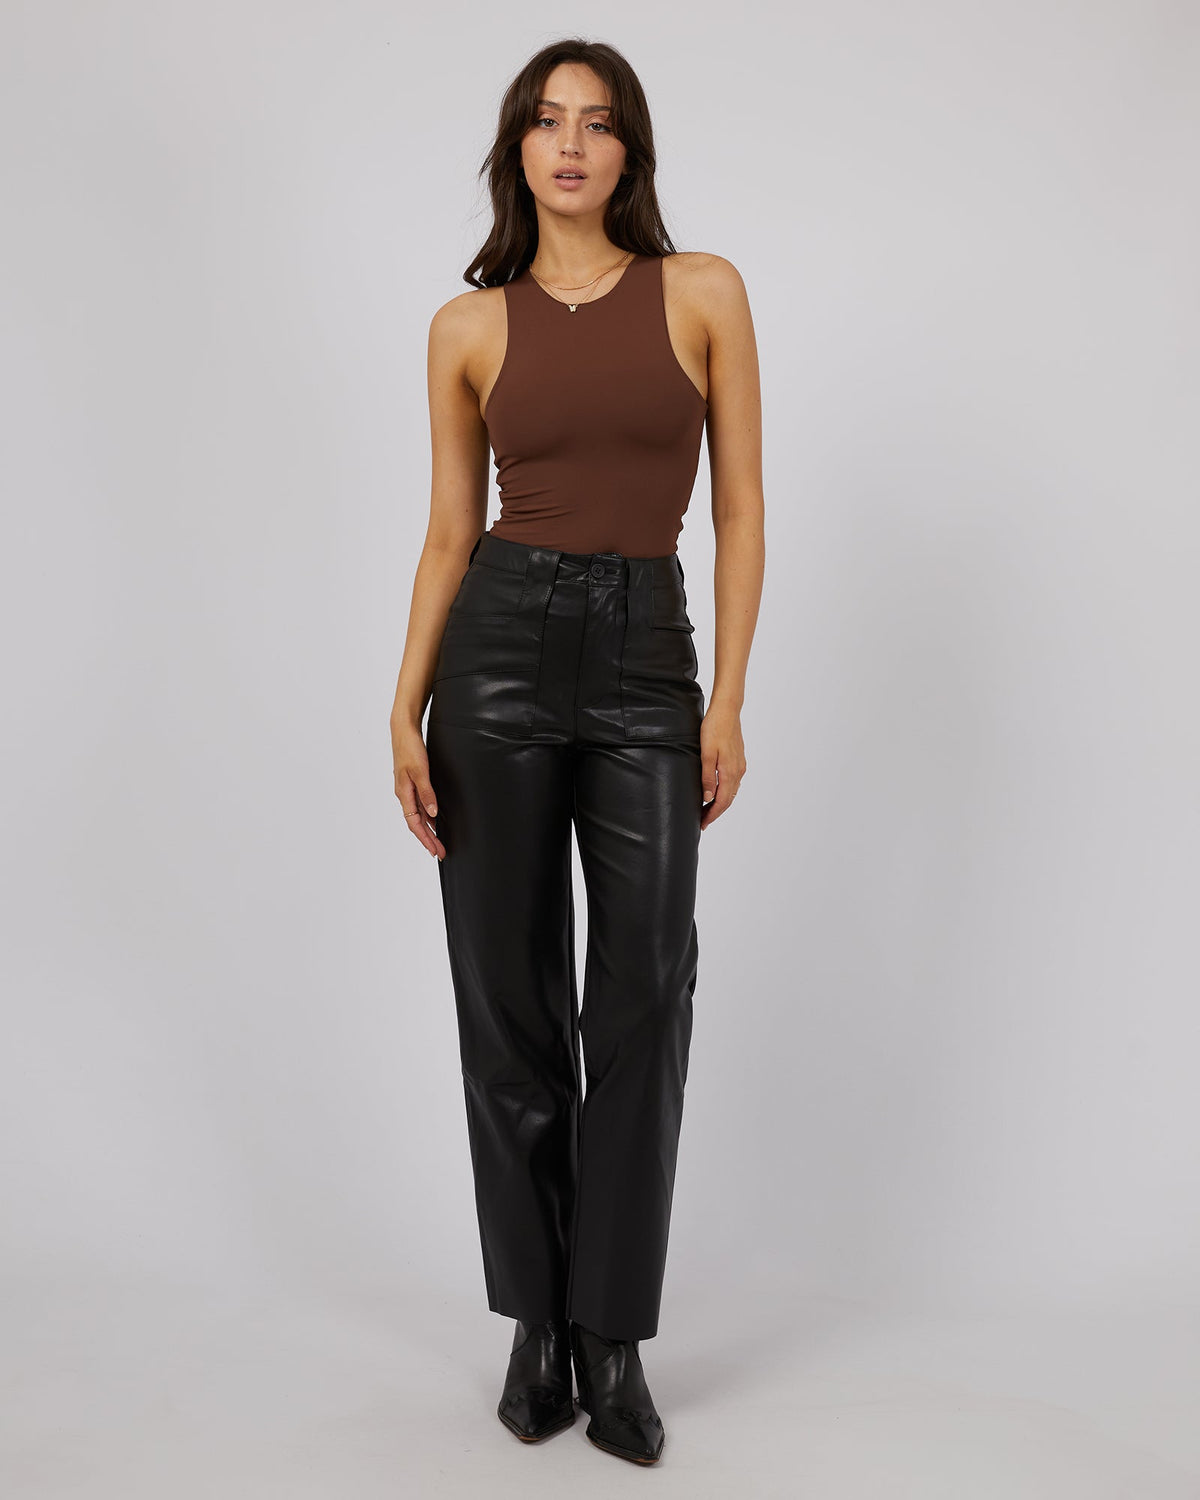 All About Eve-Eve Staple Bodysuit Brown-Edge Clothing